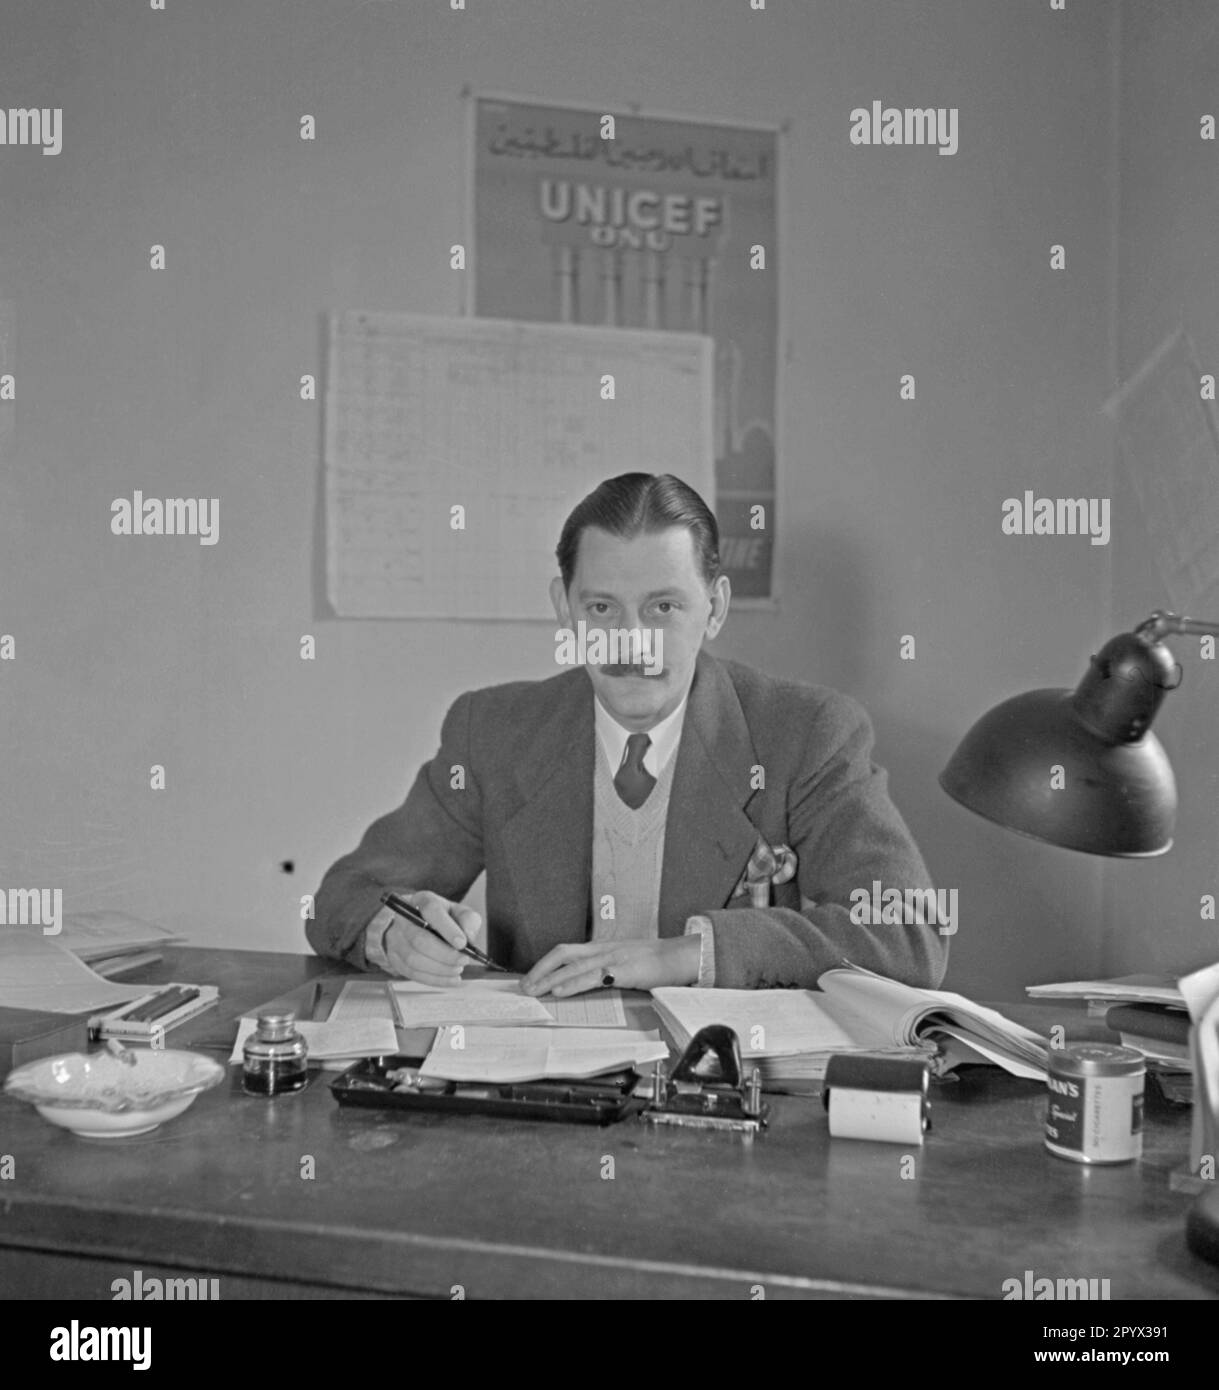 An employee of the Berlin Children's Fund of UNICEF at his desk. Undated photo. On the wall hangs a poster of UNICEF and the ONU (UNO) with Arabic characters. Left, an ashtray with cigarette and an inkwell. Stock Photo